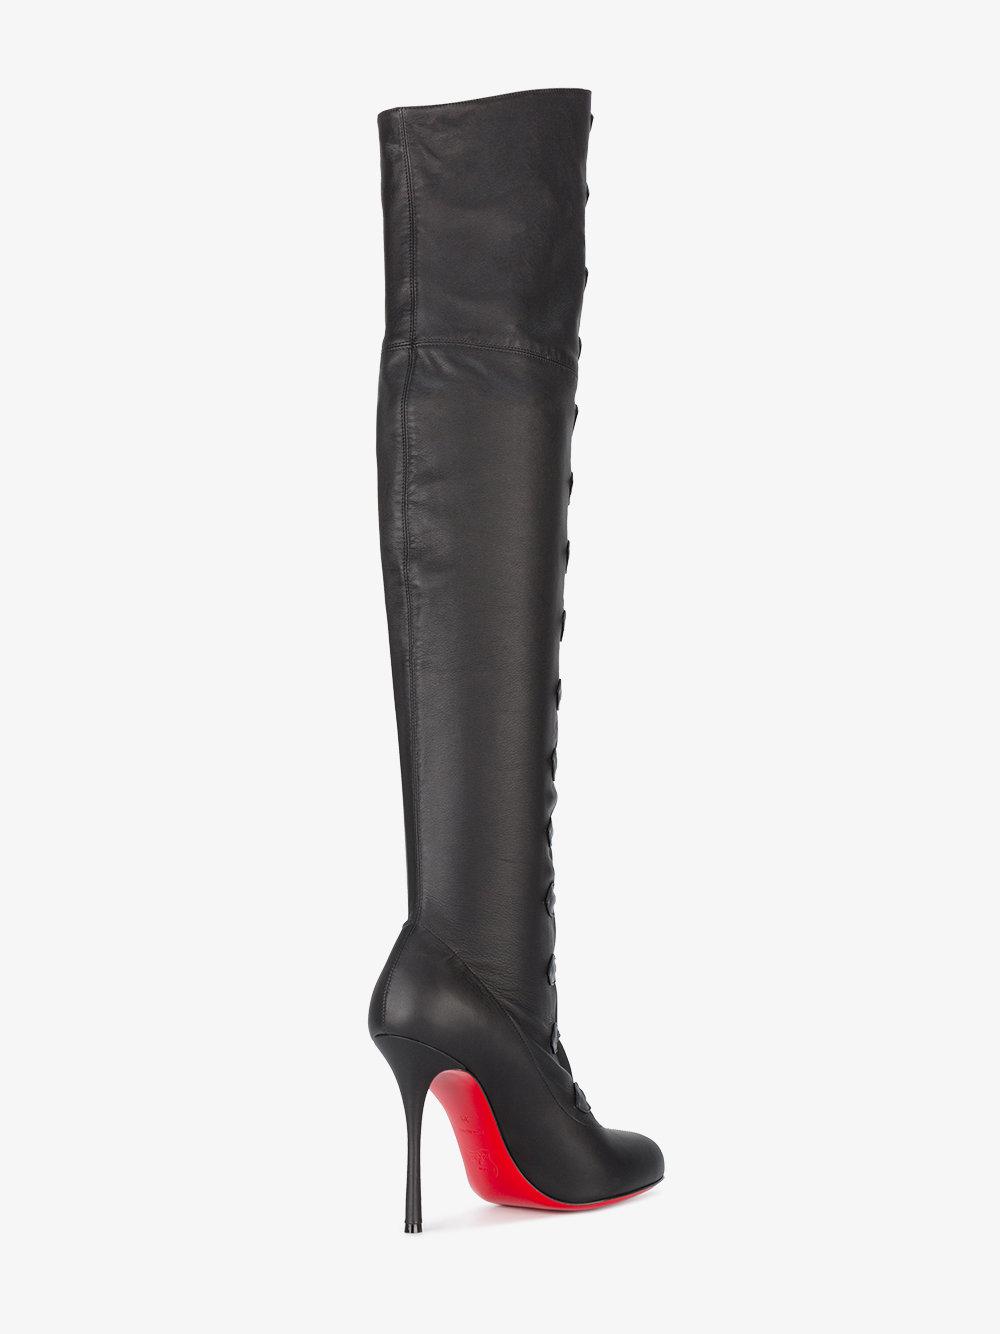 louboutin high boots